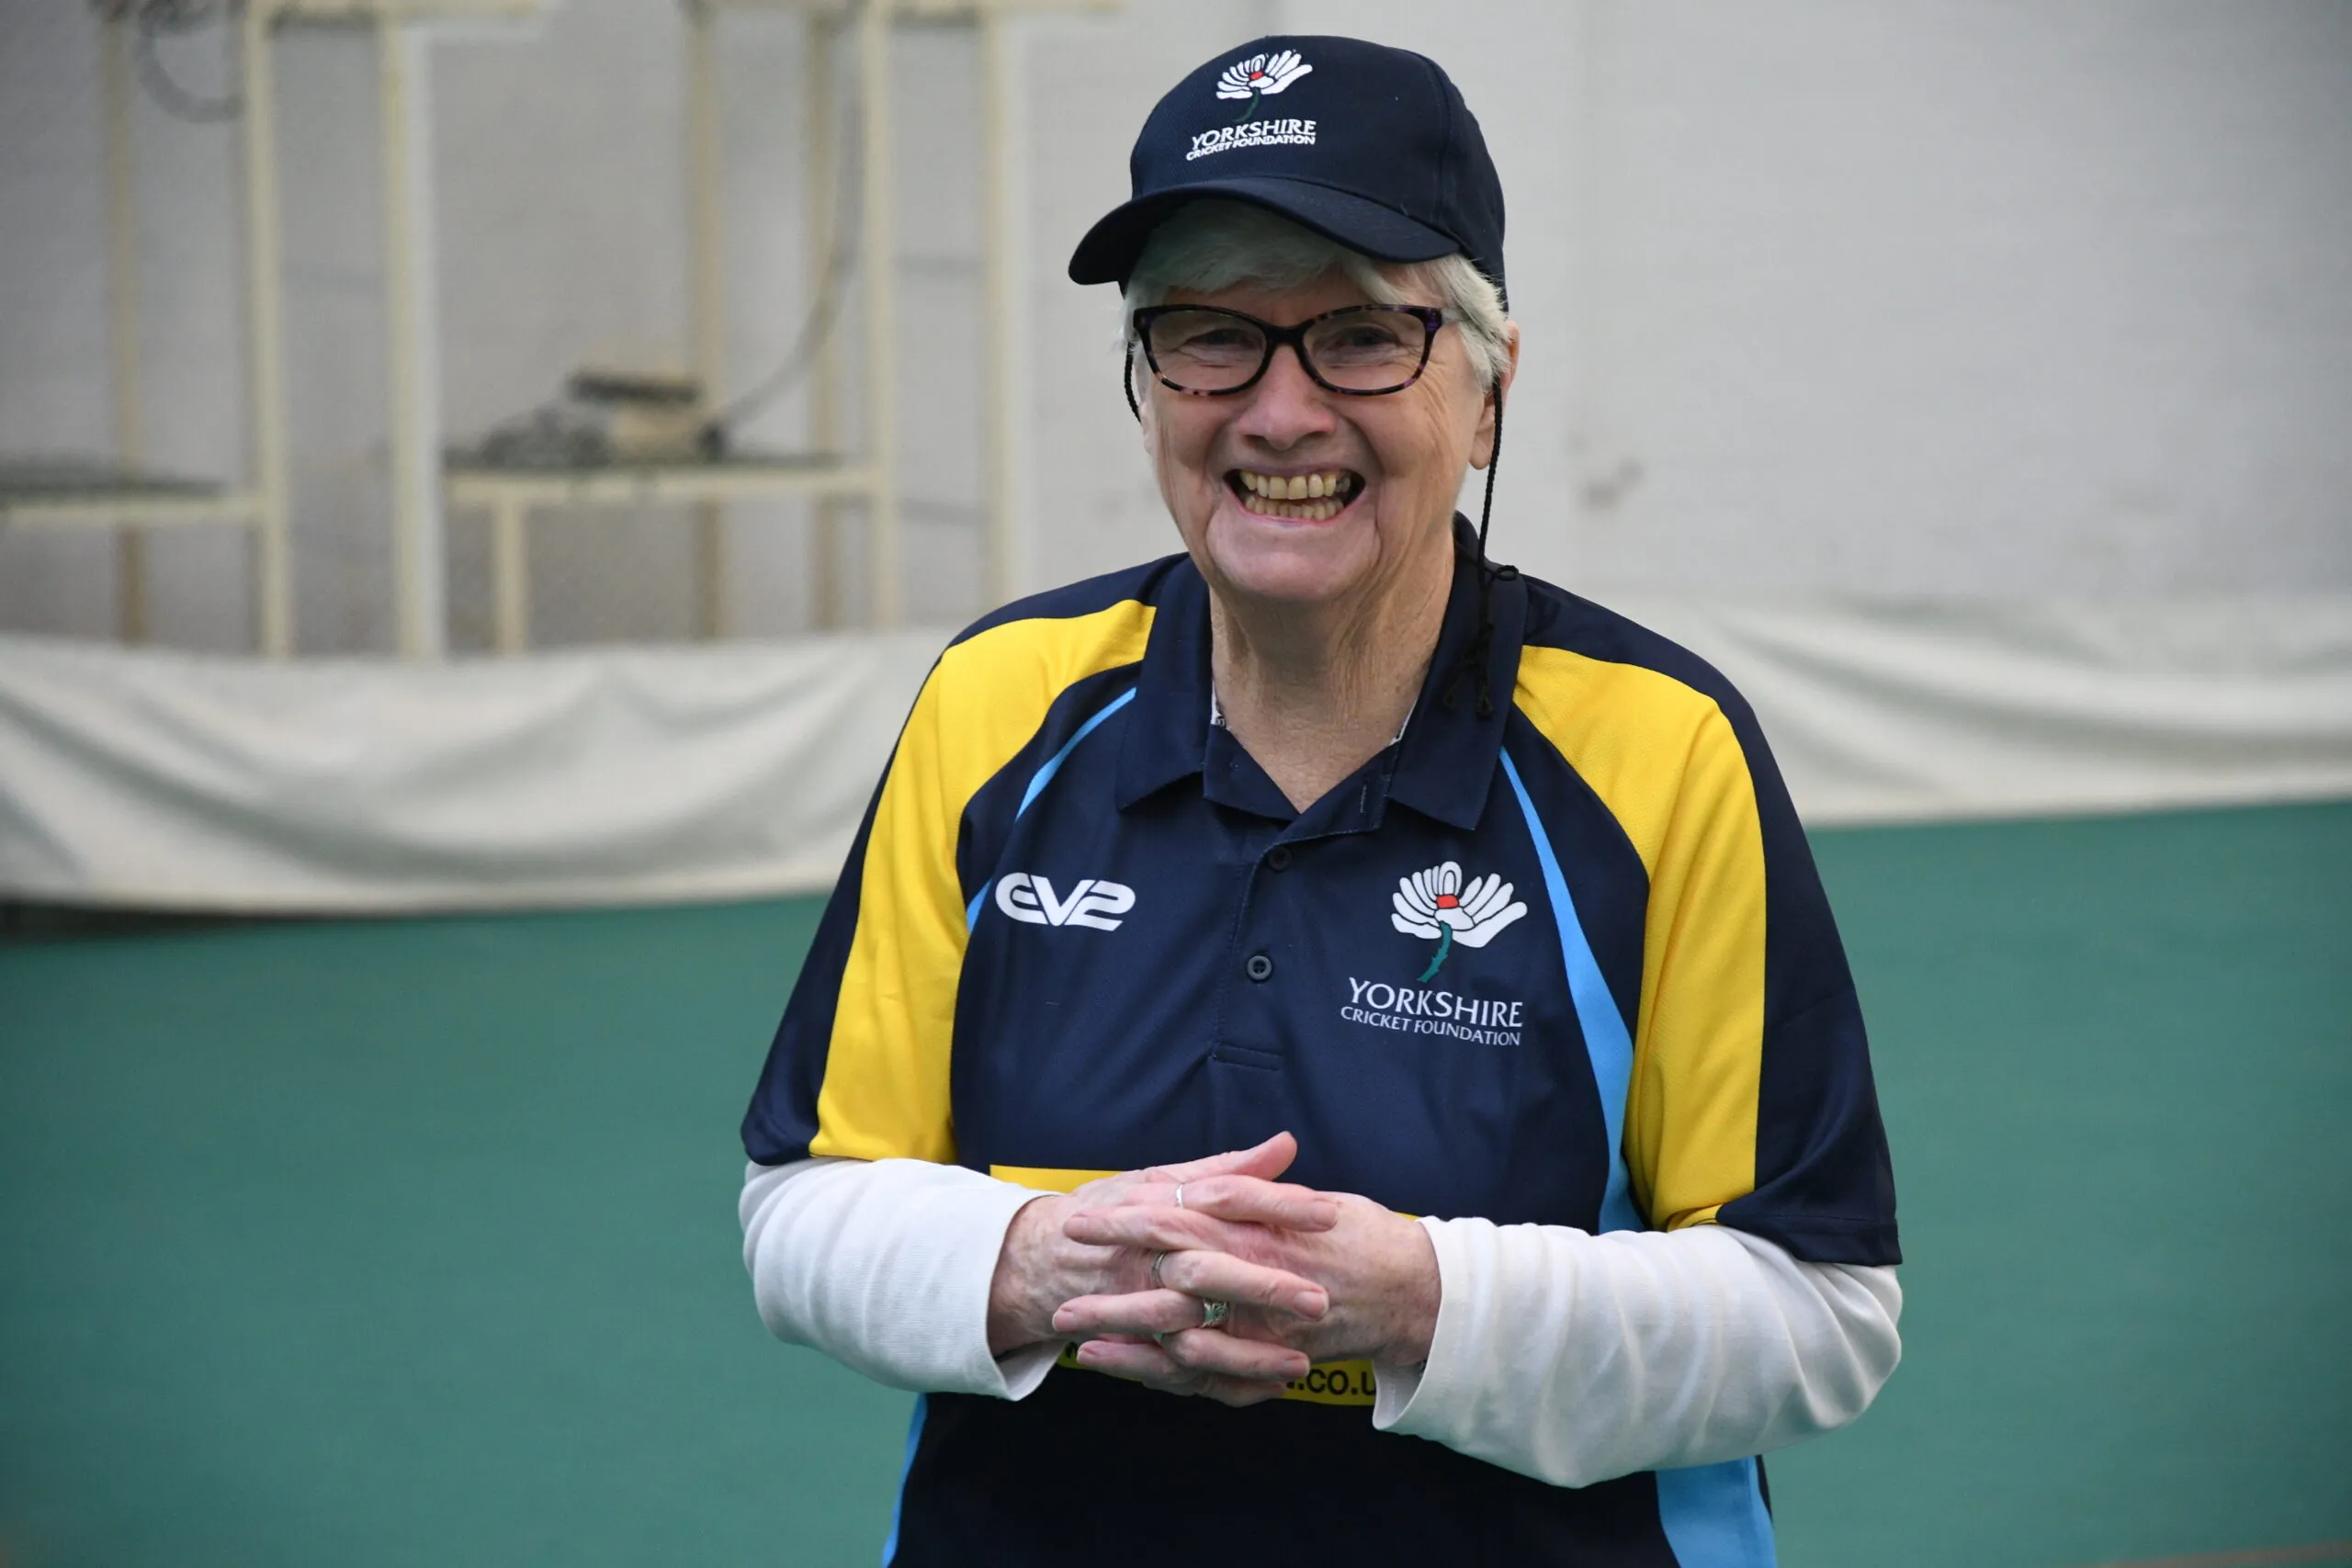 Norah smiling during a walking cricket session in Headingley's cricket center